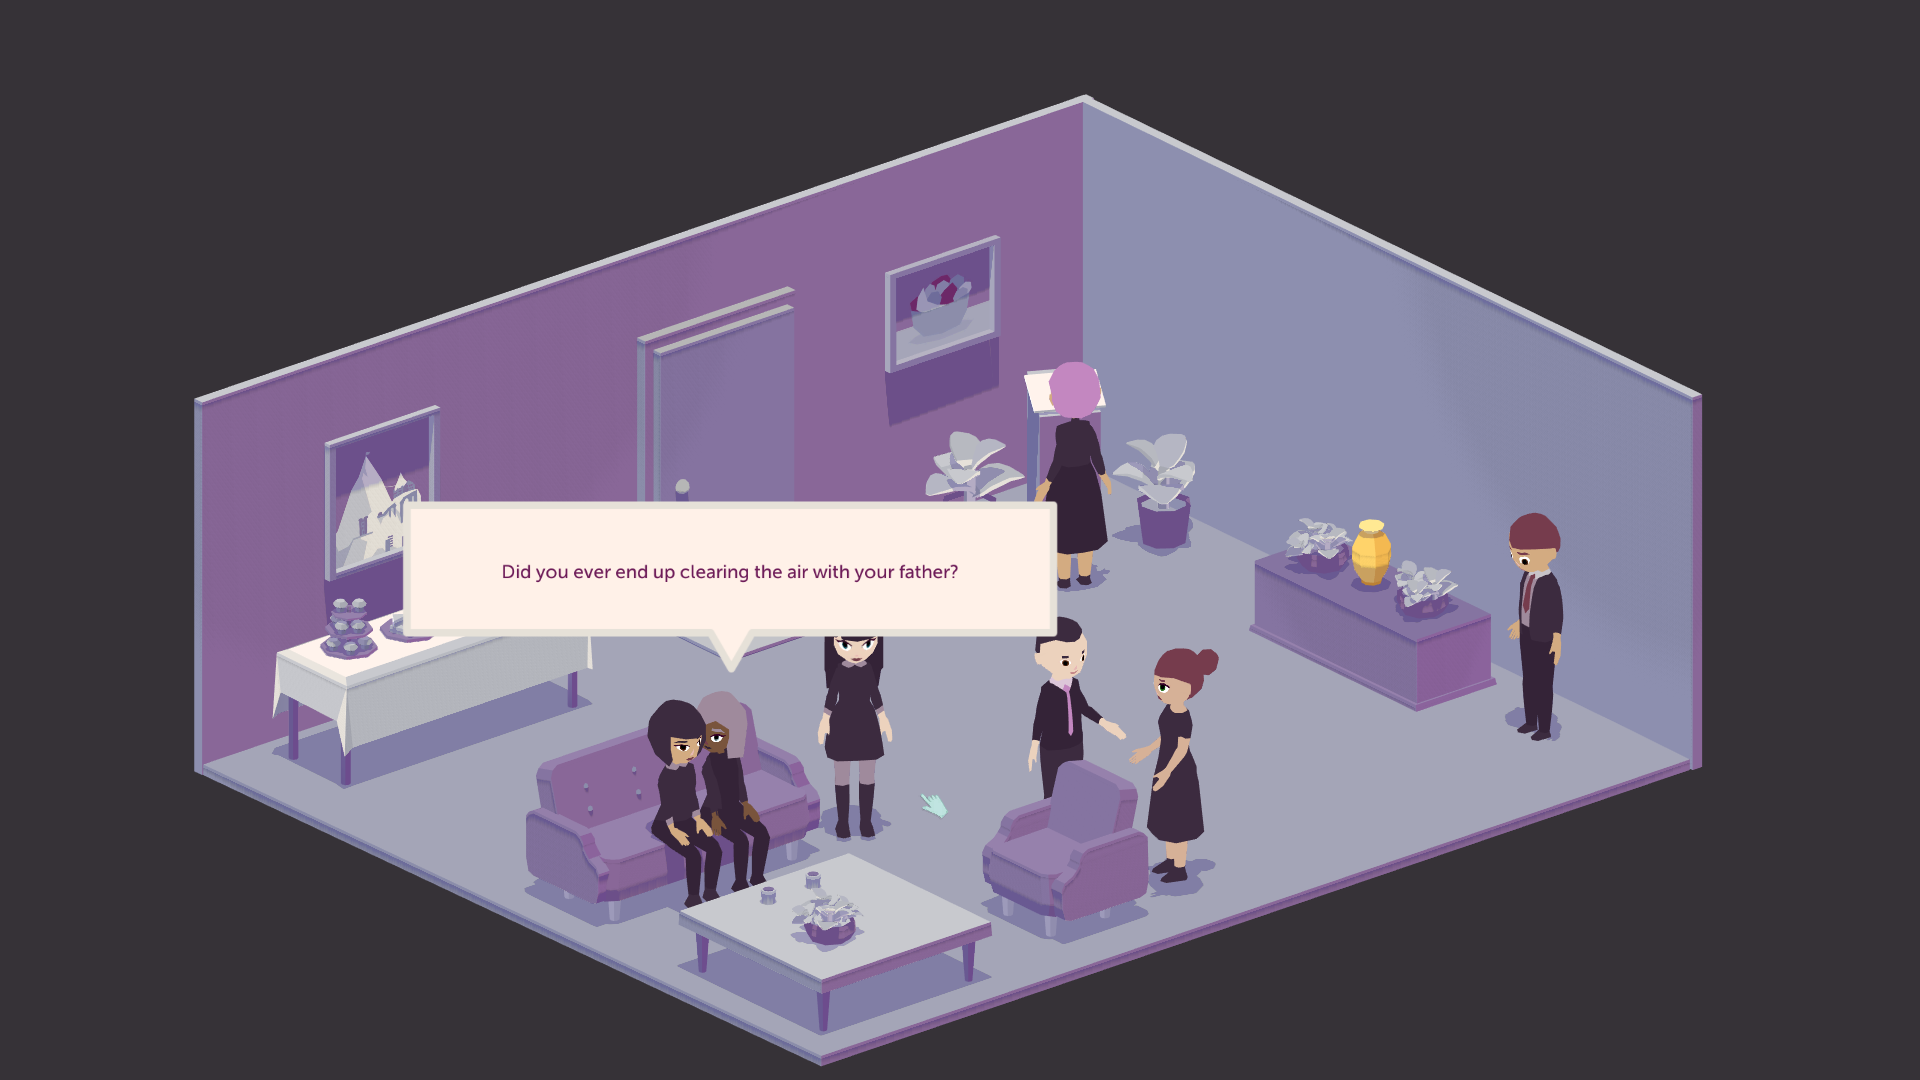 People are milling in a room. Two feminine characters are sitting on a couch. There is a speech bubble showing one saying to the other 'Did you ever end up clearing the air with your father?'